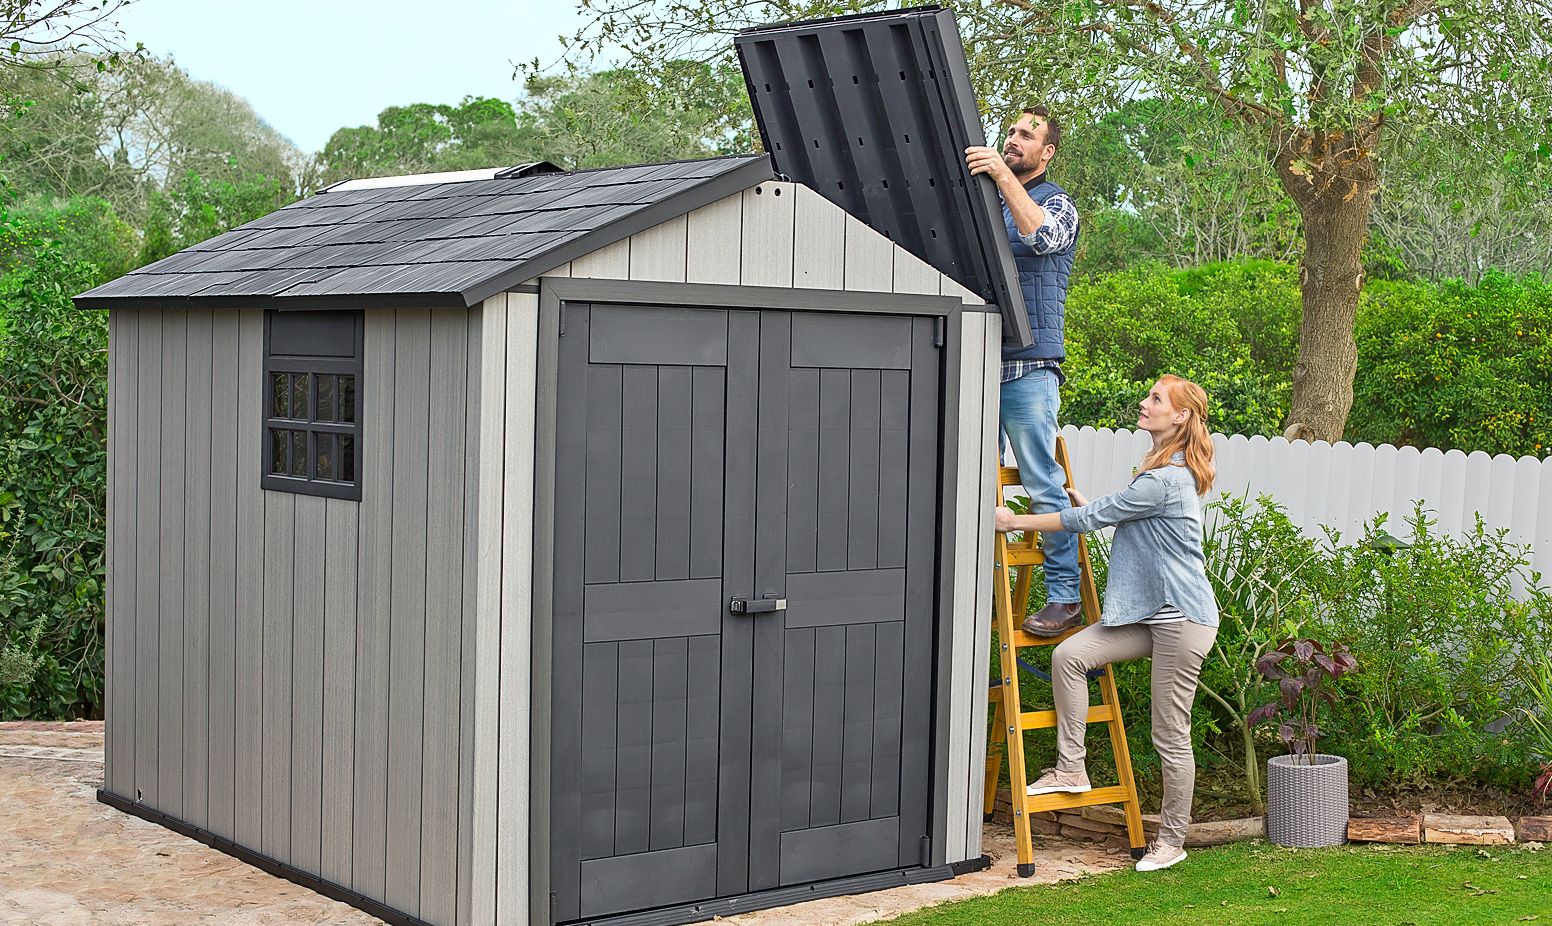 4 Shed Storage Ideas For Tons Of Added Function